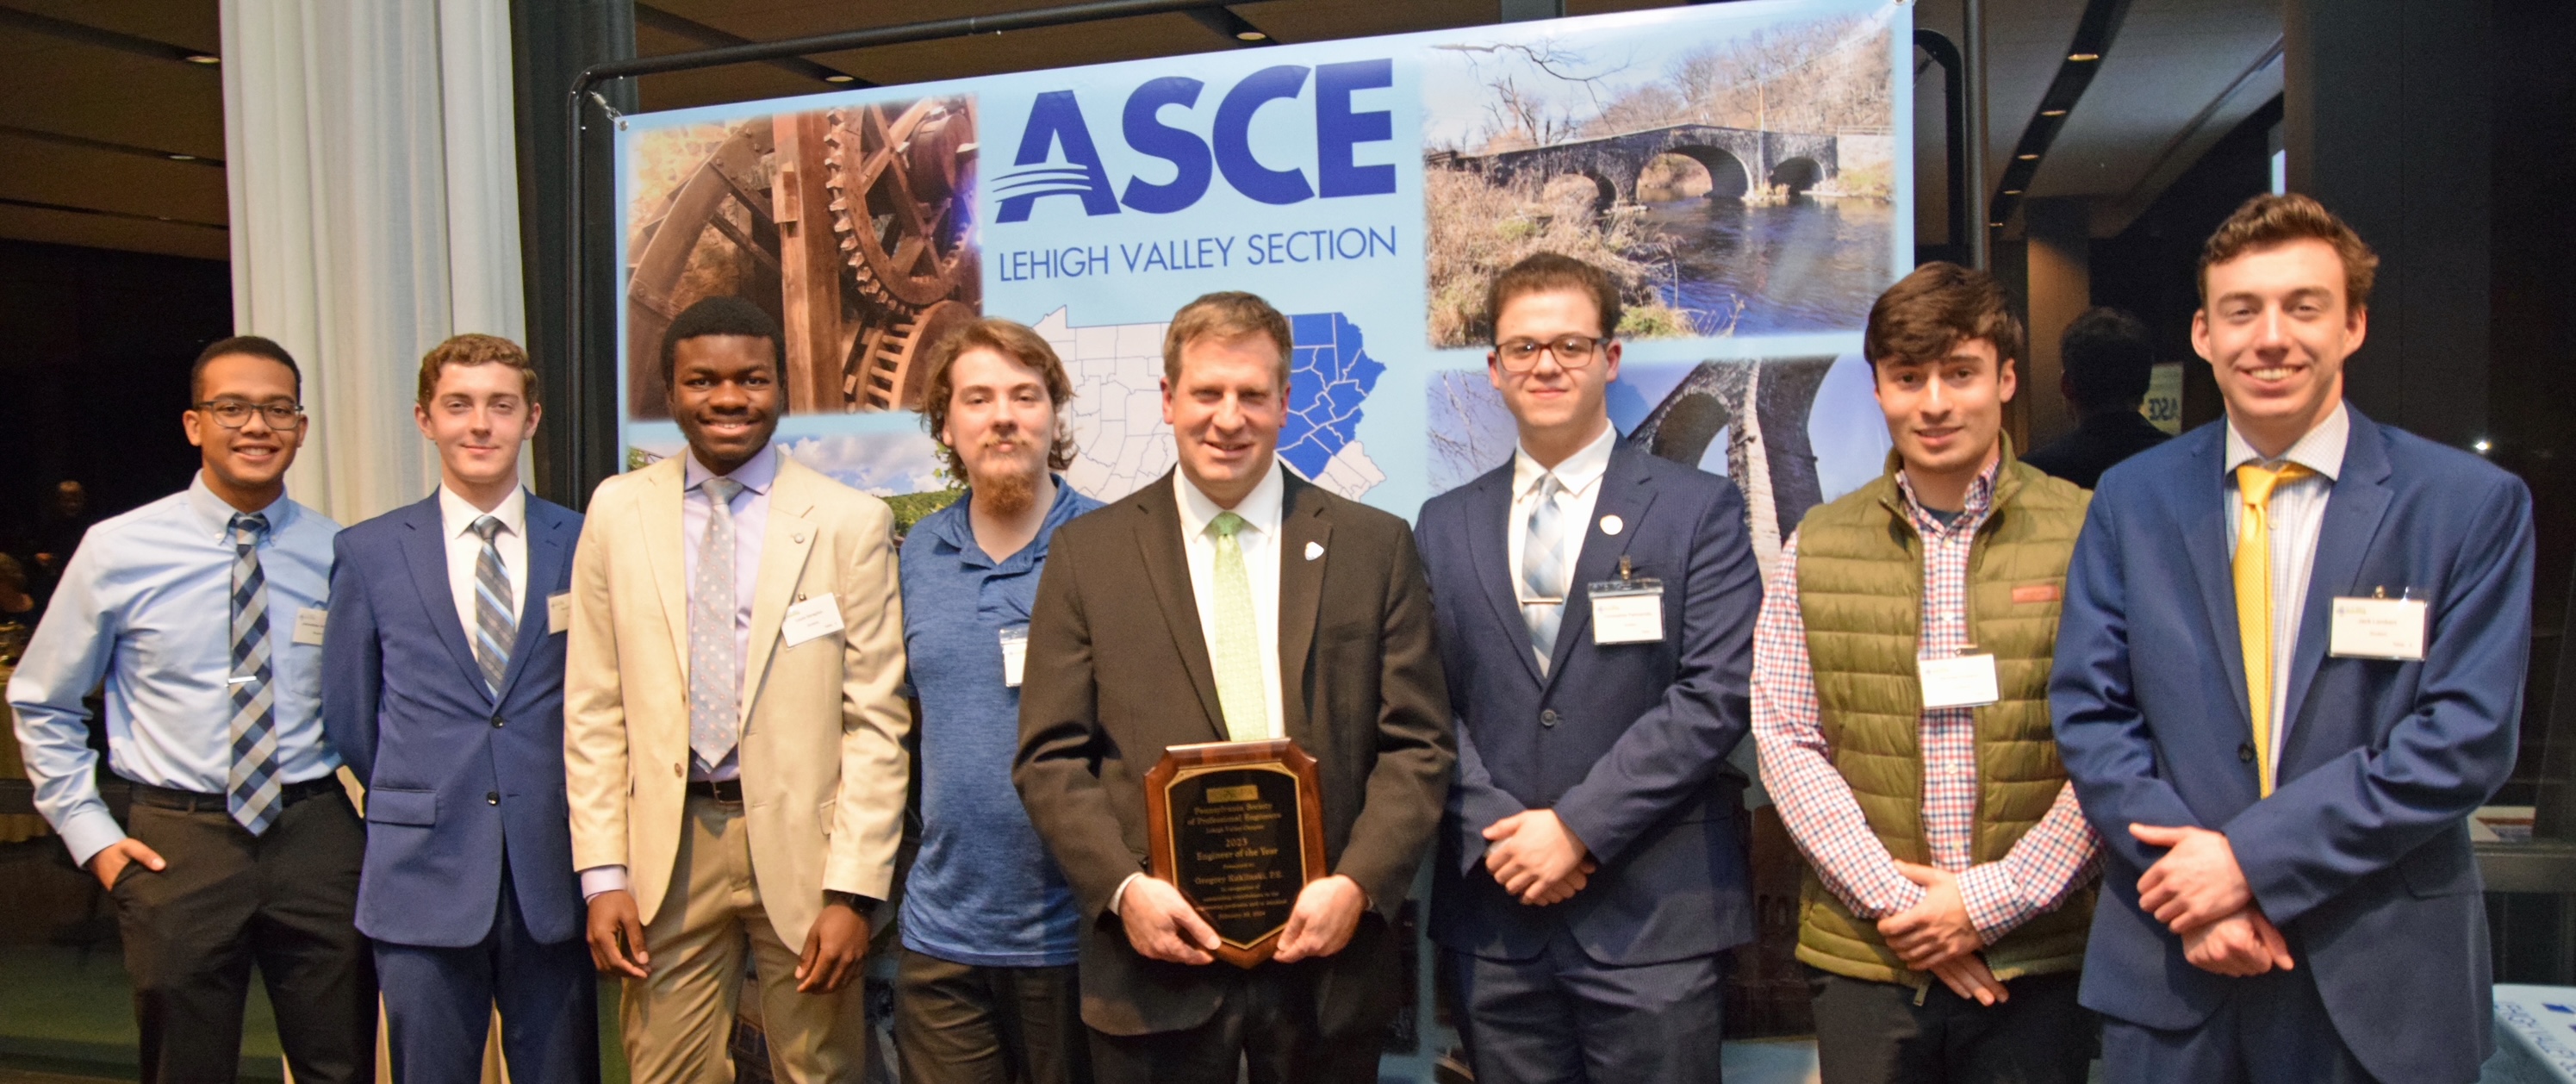 Man holding award plaque stands in from of an "ASCE Lehigh Valley Section" banner flanked by male engineering students wearing business attire and name tags.